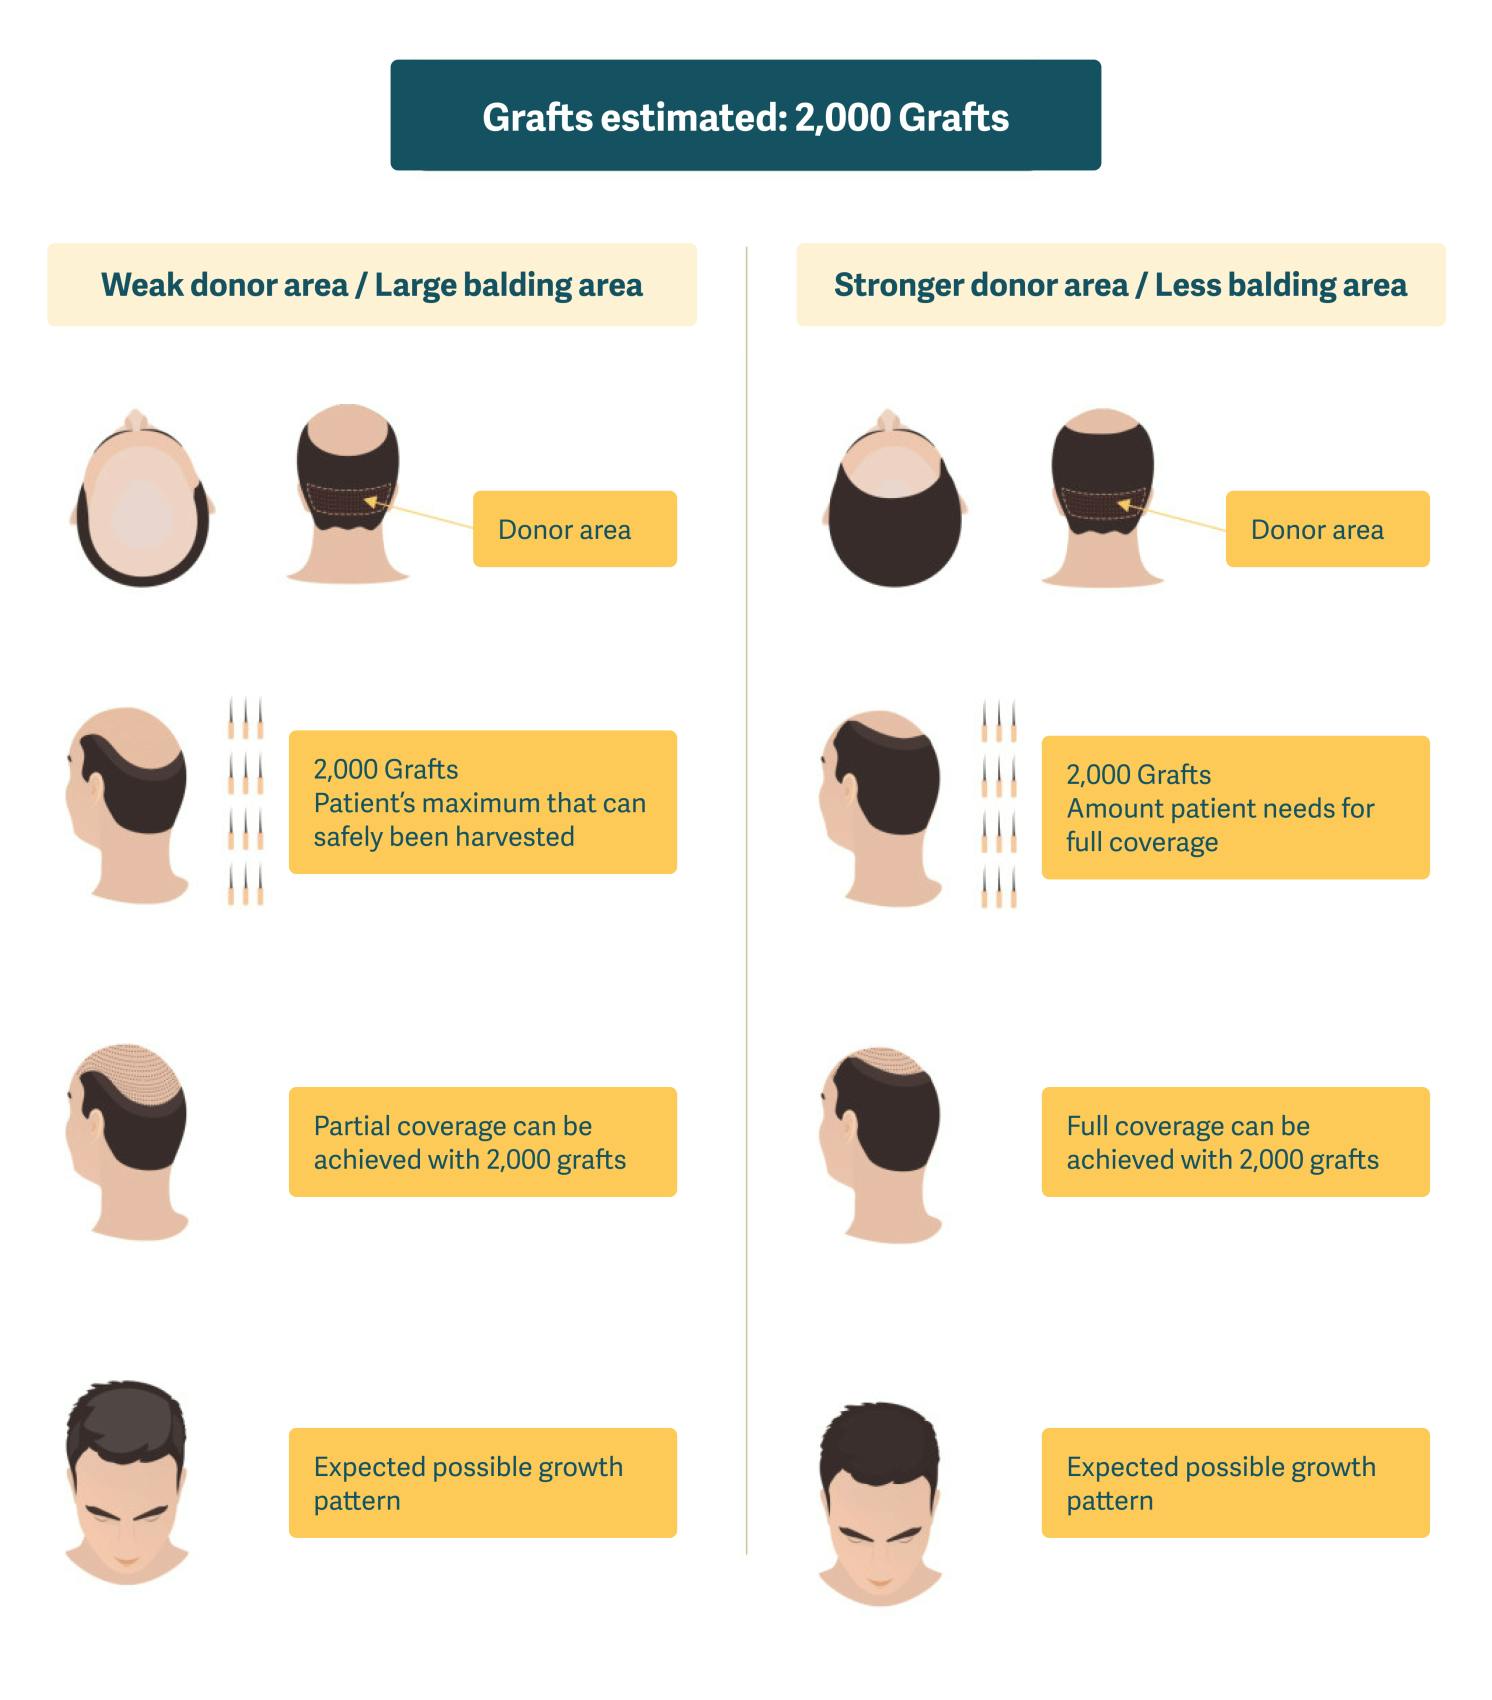 Illustration showing the possibilities of achieving full coverage from a 2,000 graft hair transplant.